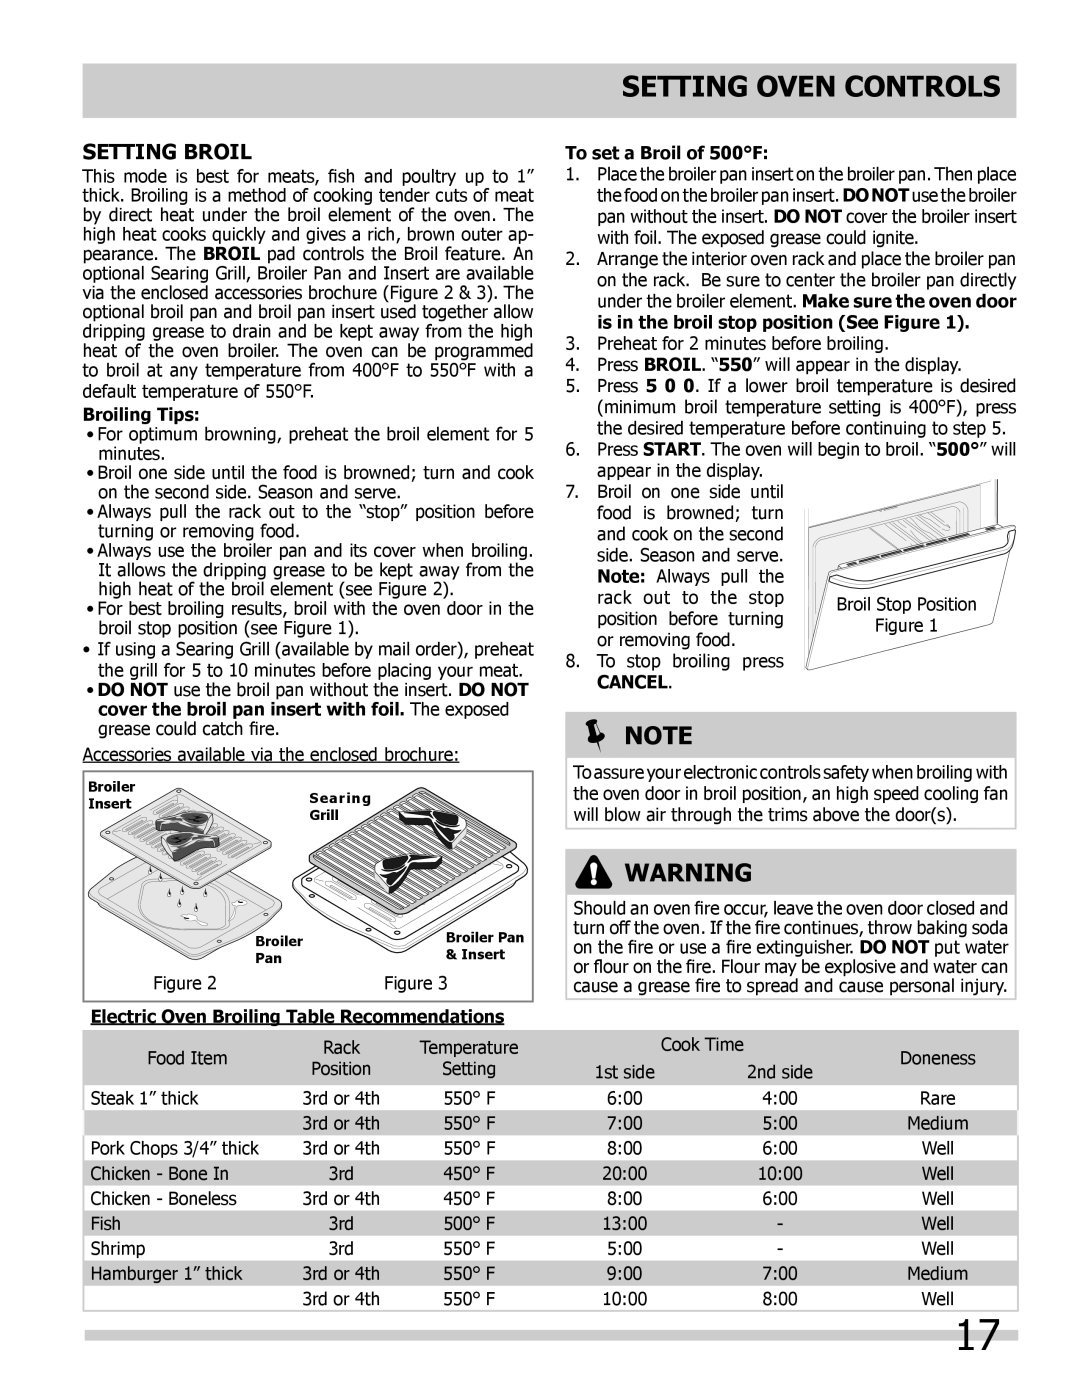 Frigidaire 318205307 Setting Broil, Broiling Tips, Electric Oven Broiling Table Recommendations, To set a Broil of 500F 